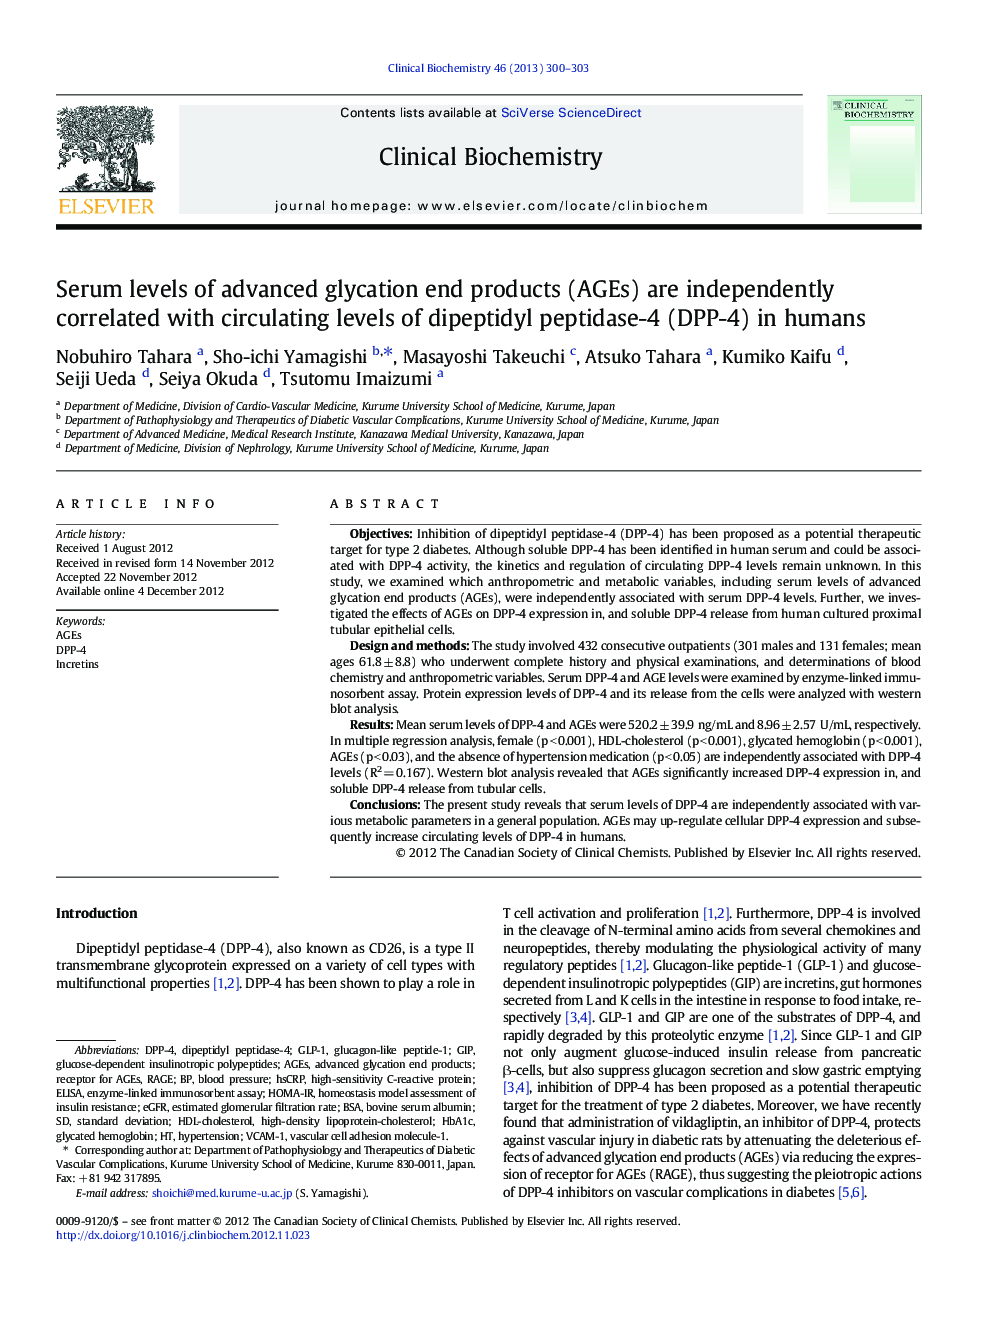 Serum levels of advanced glycation end products (AGEs) are independently correlated with circulating levels of dipeptidyl peptidase-4 (DPP-4) in humans